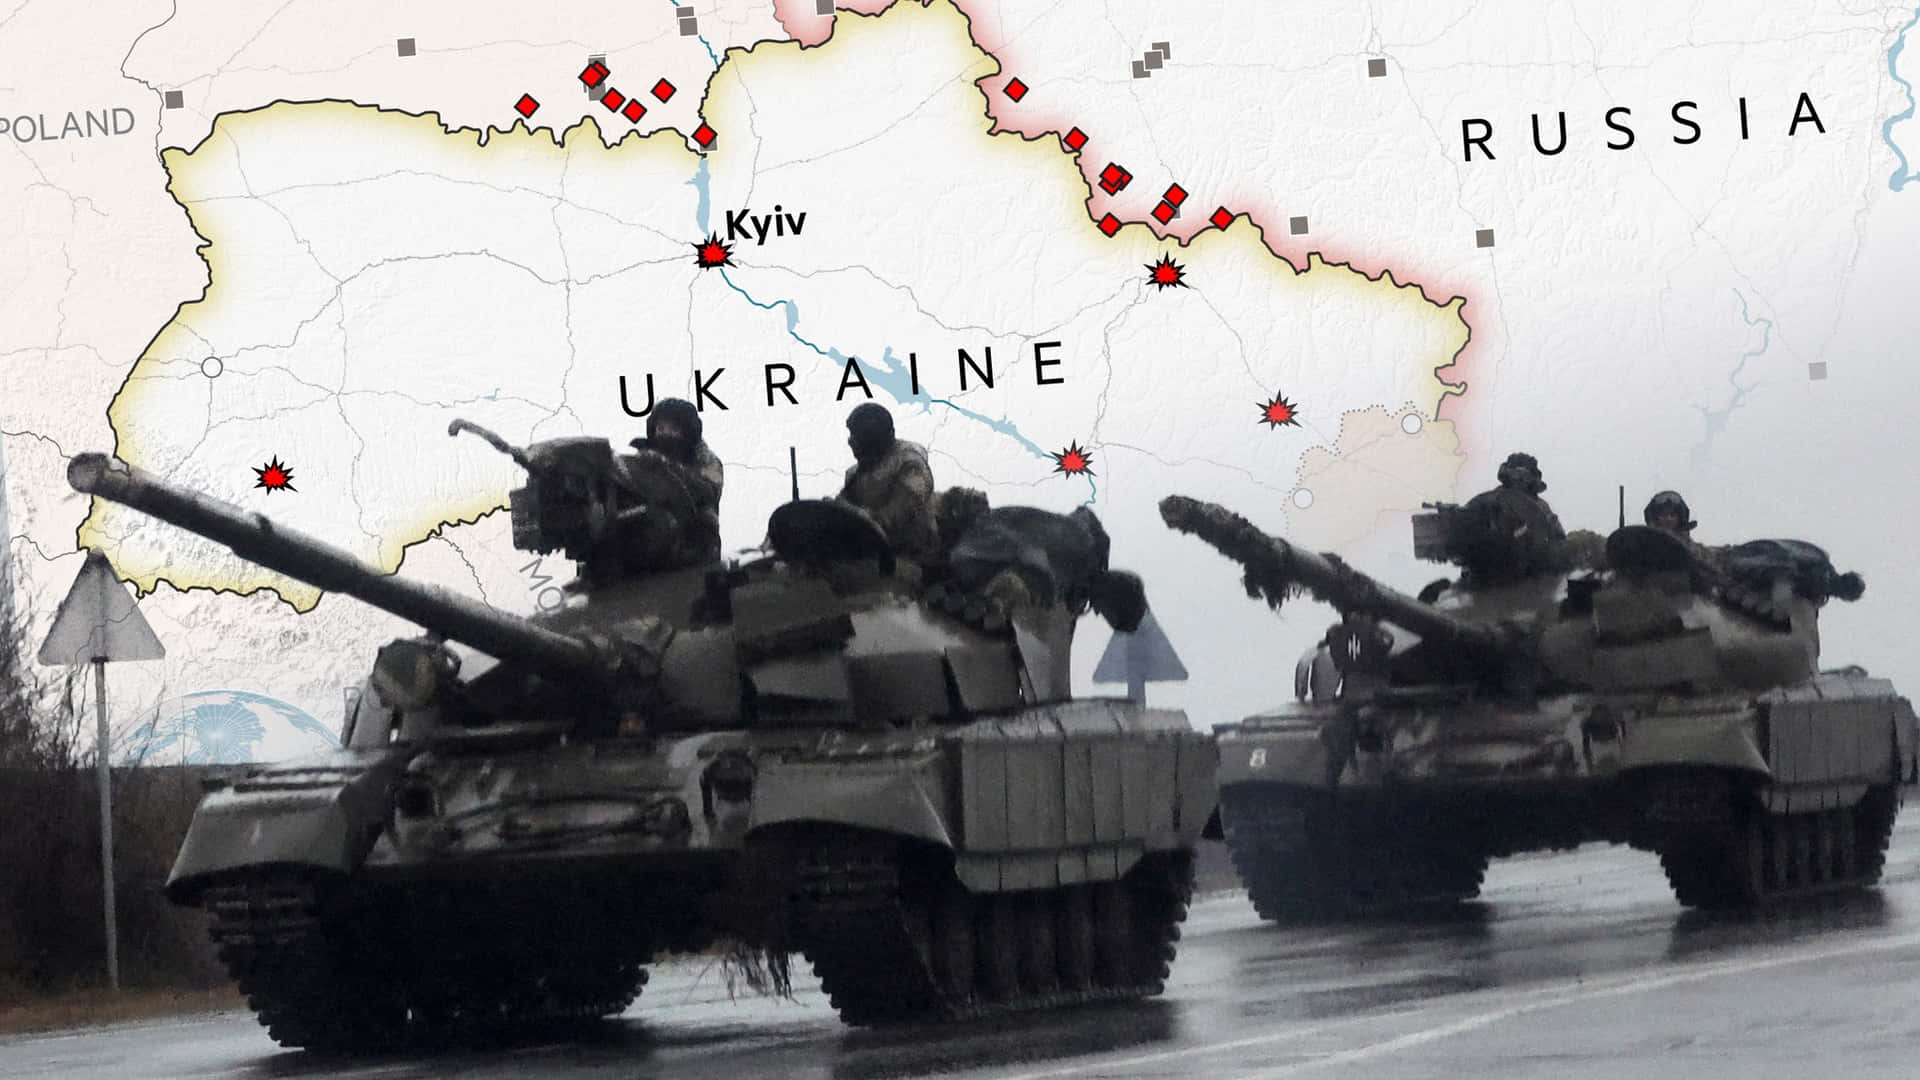 Ukraine's Military Forces On The Road With A Map Background